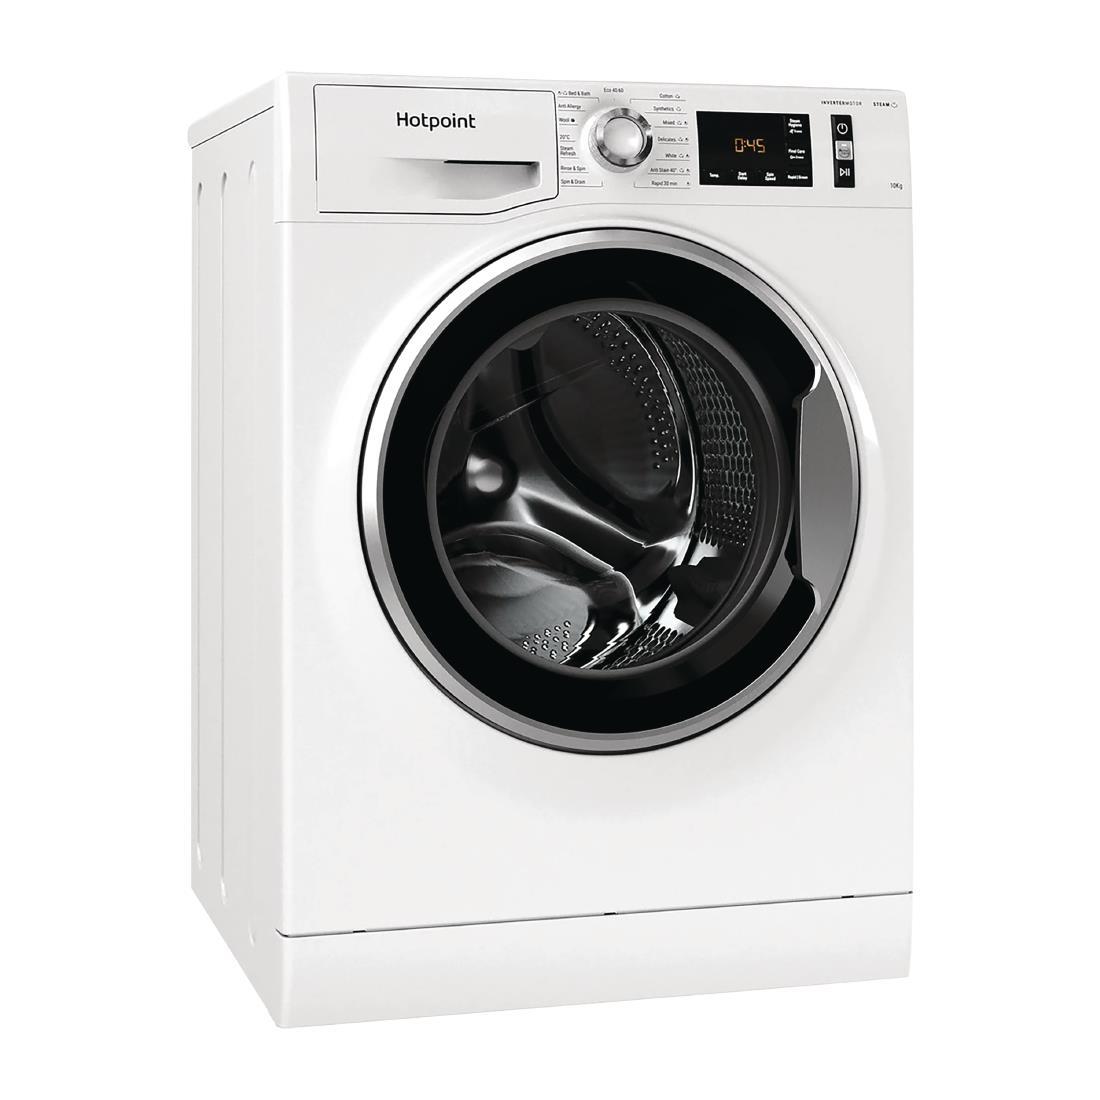 Hotpoint ActiveCare Washing Machine NM11 1045 WC A - DC974  - 1